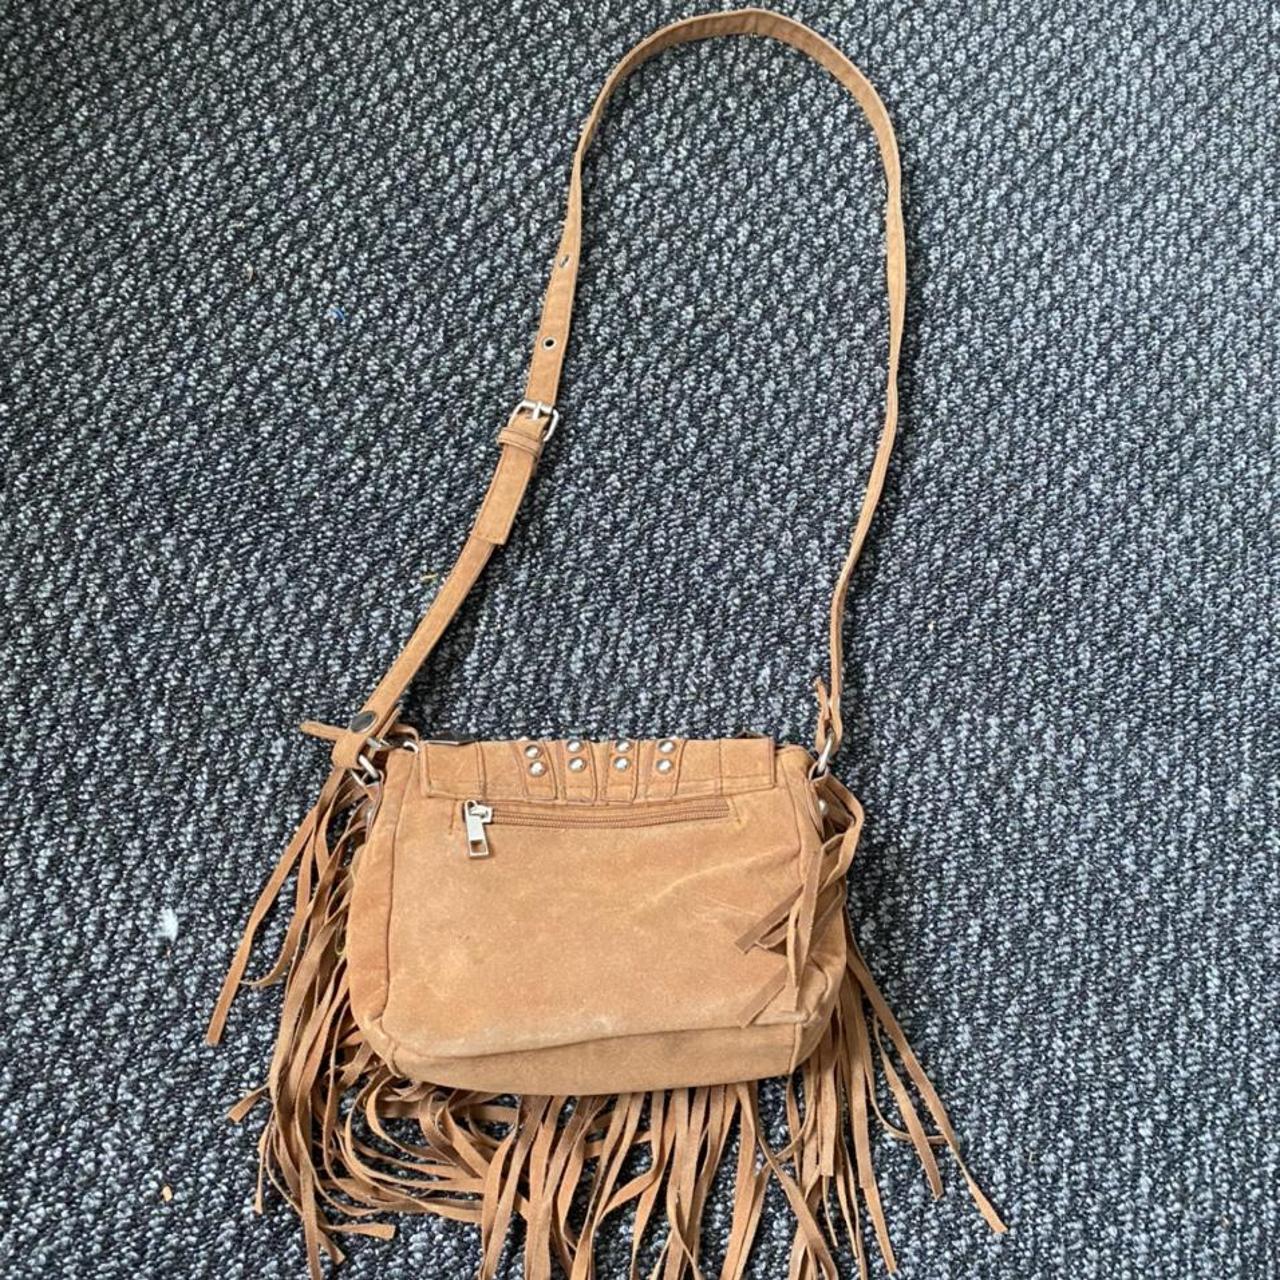 Product Image 3 - Brown suede fringe cross body